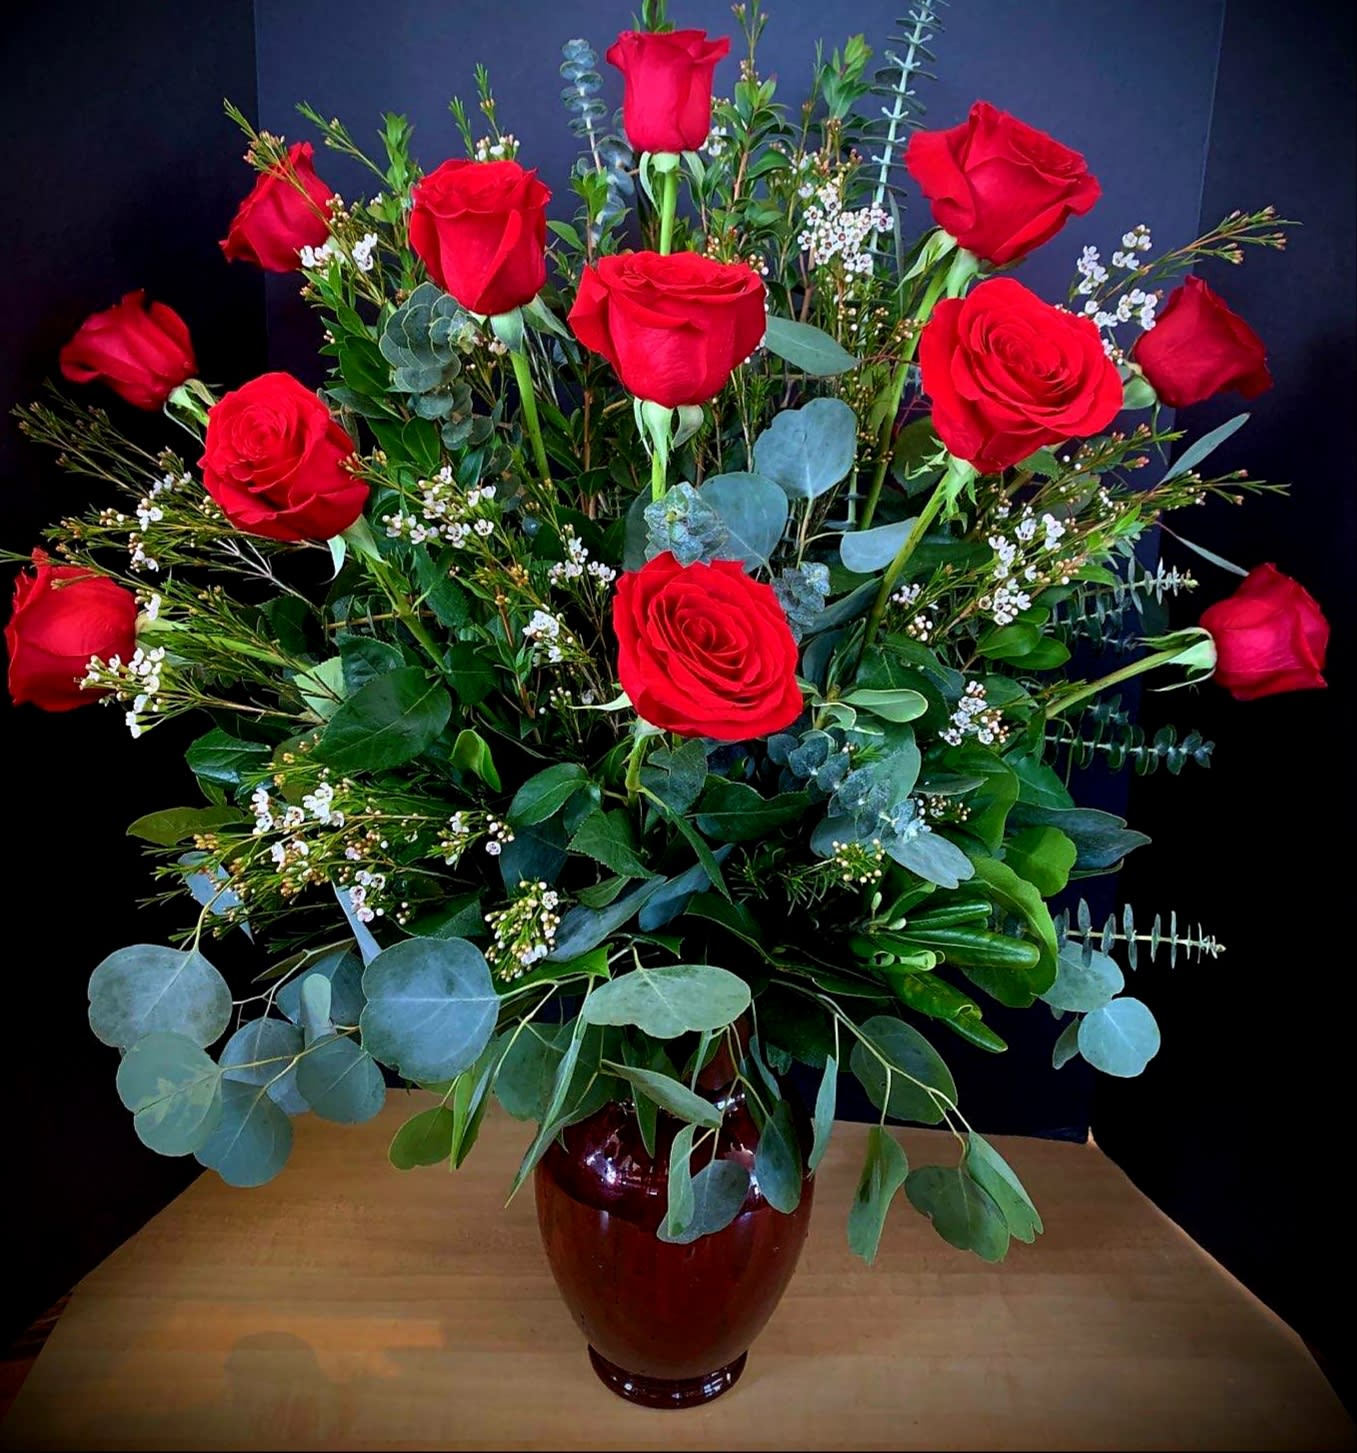 Classic Red Roses - A dozen luscious red roses in a  ruby red glass vase - the ultimate gift of love. Imagine her delight when this dazzling gift arrives at the front door.  The classic bouquet includes 12 premium red roses and accnet flower. Delivered in a ruby-red-glass vase. Bouquet is approximately 18” W X 30” H  